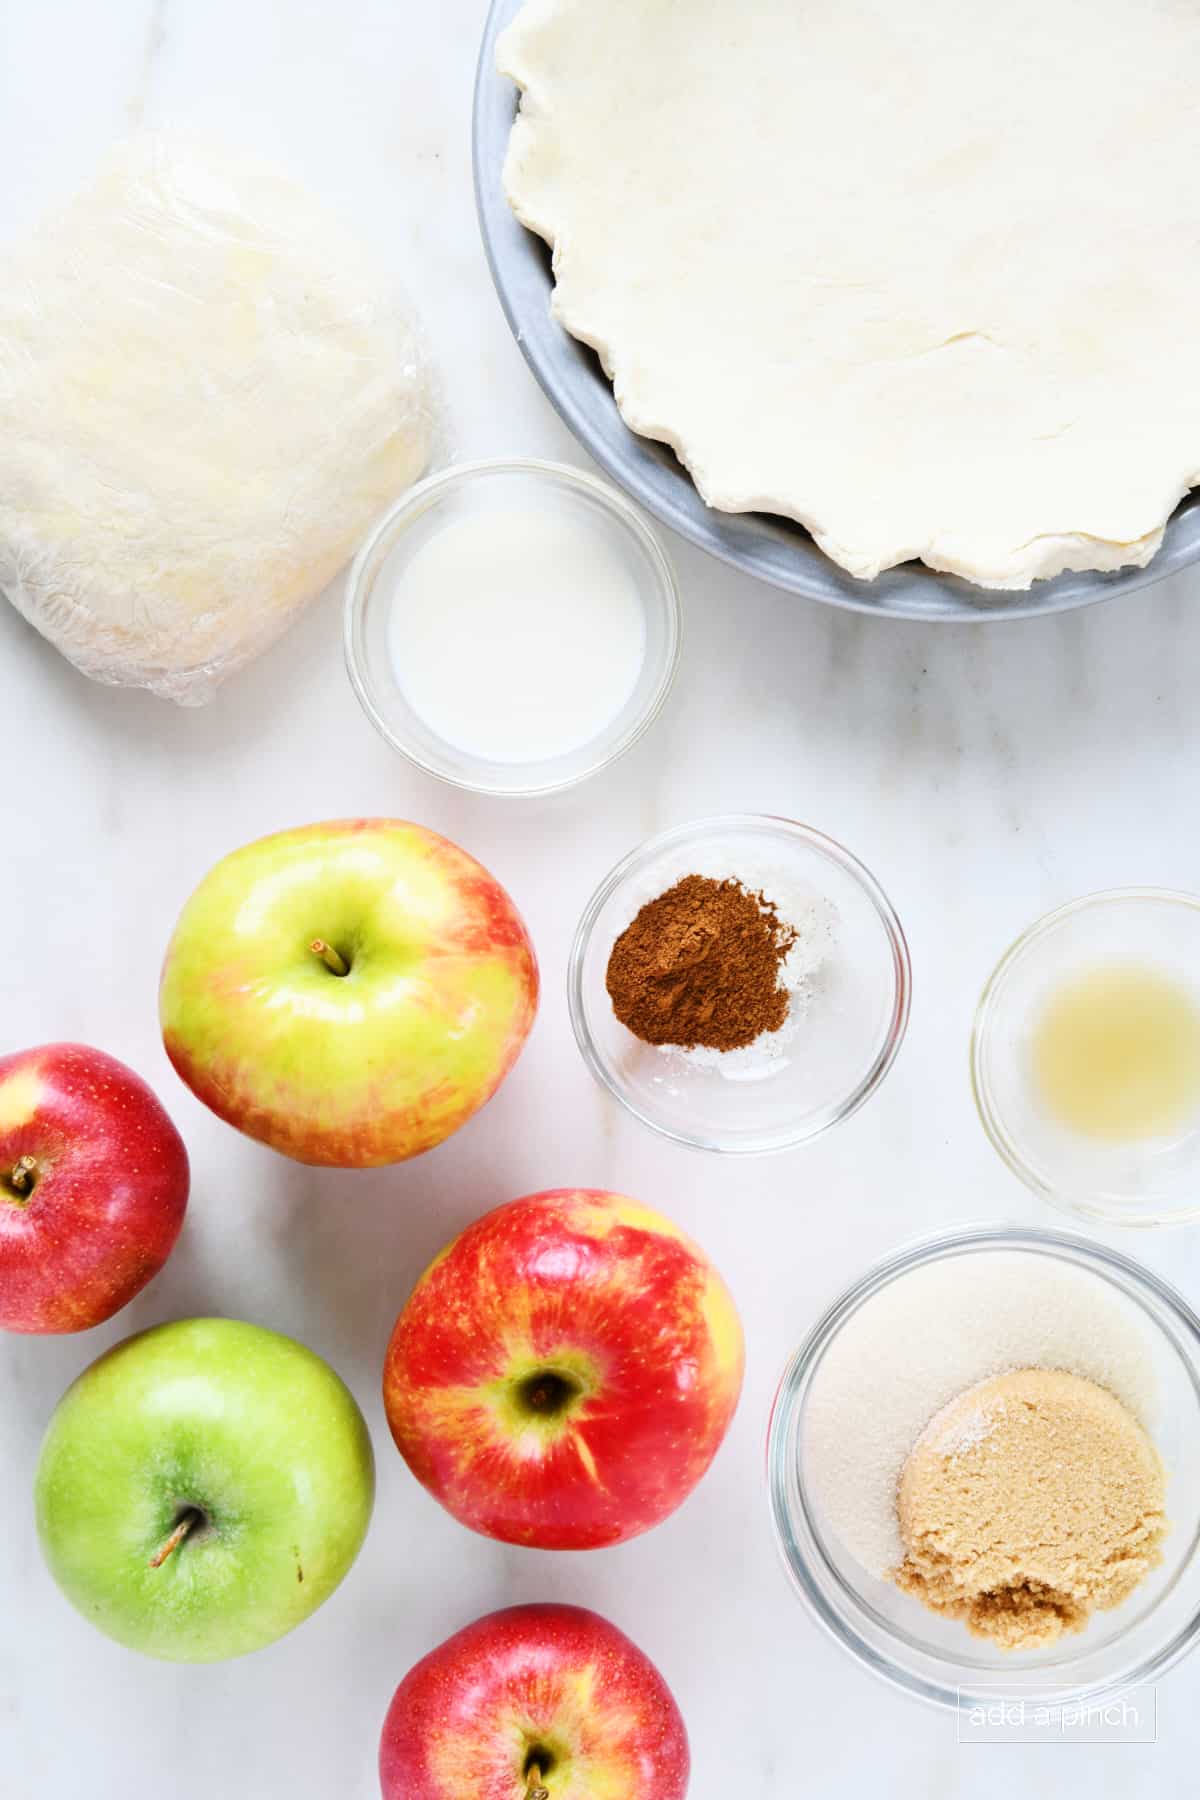 Ingredients used to make homemade apple pie on a marble surface.